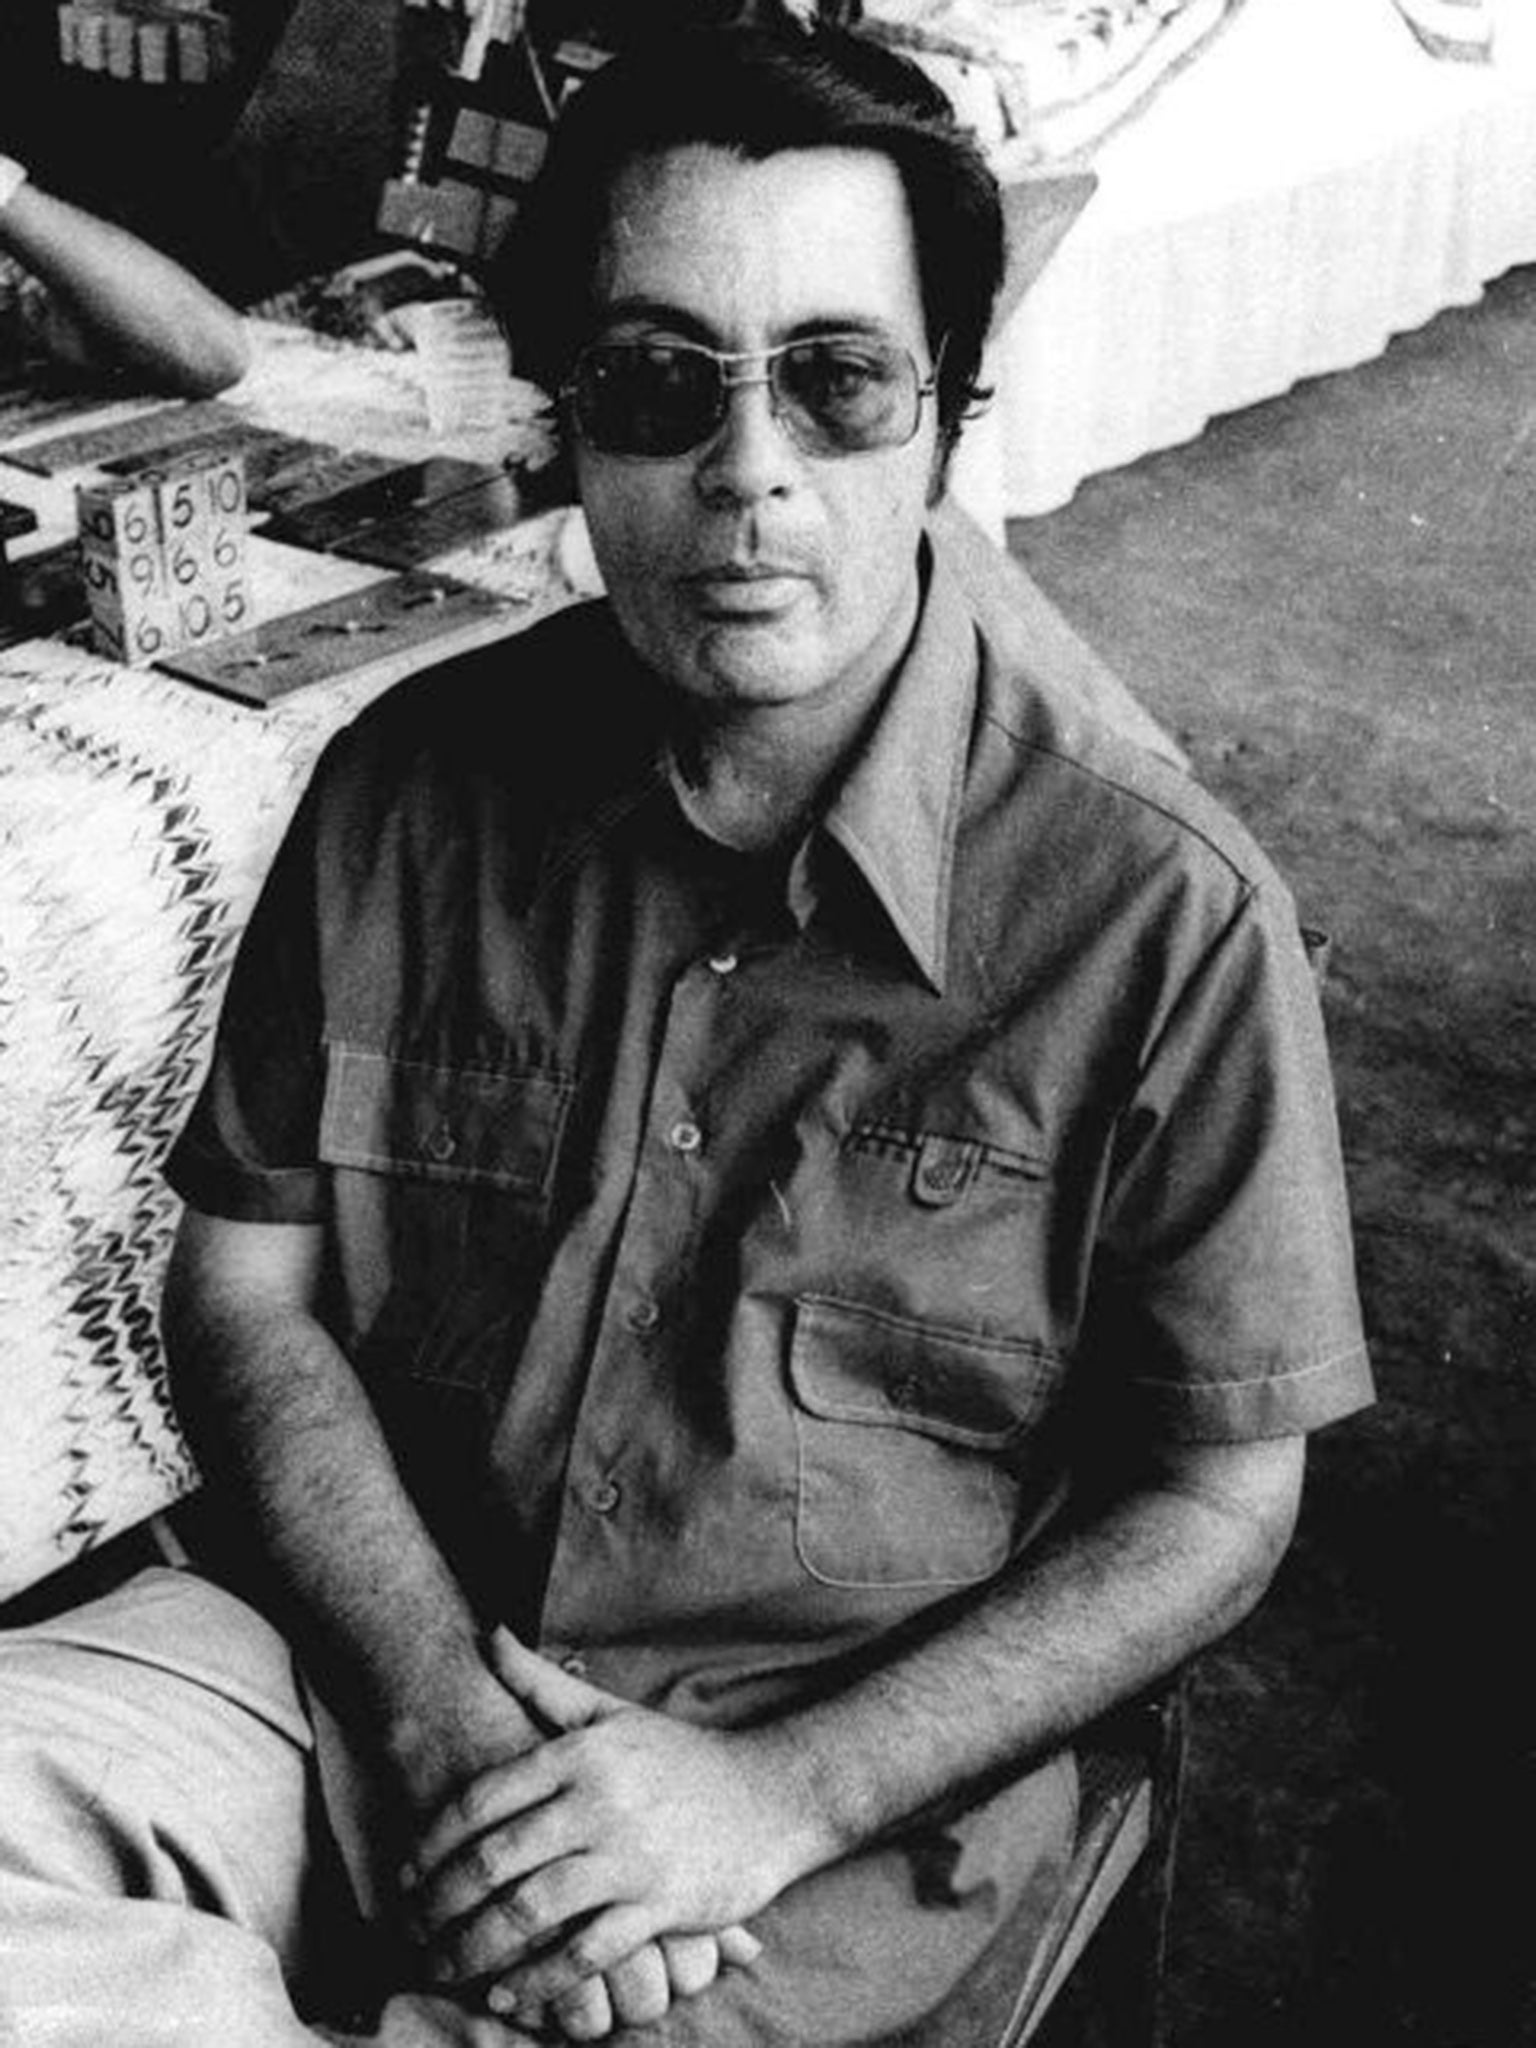 Cult leader Jim Jones in Jonestown in 1978, the year he would cause the deaths of nearly a thousand